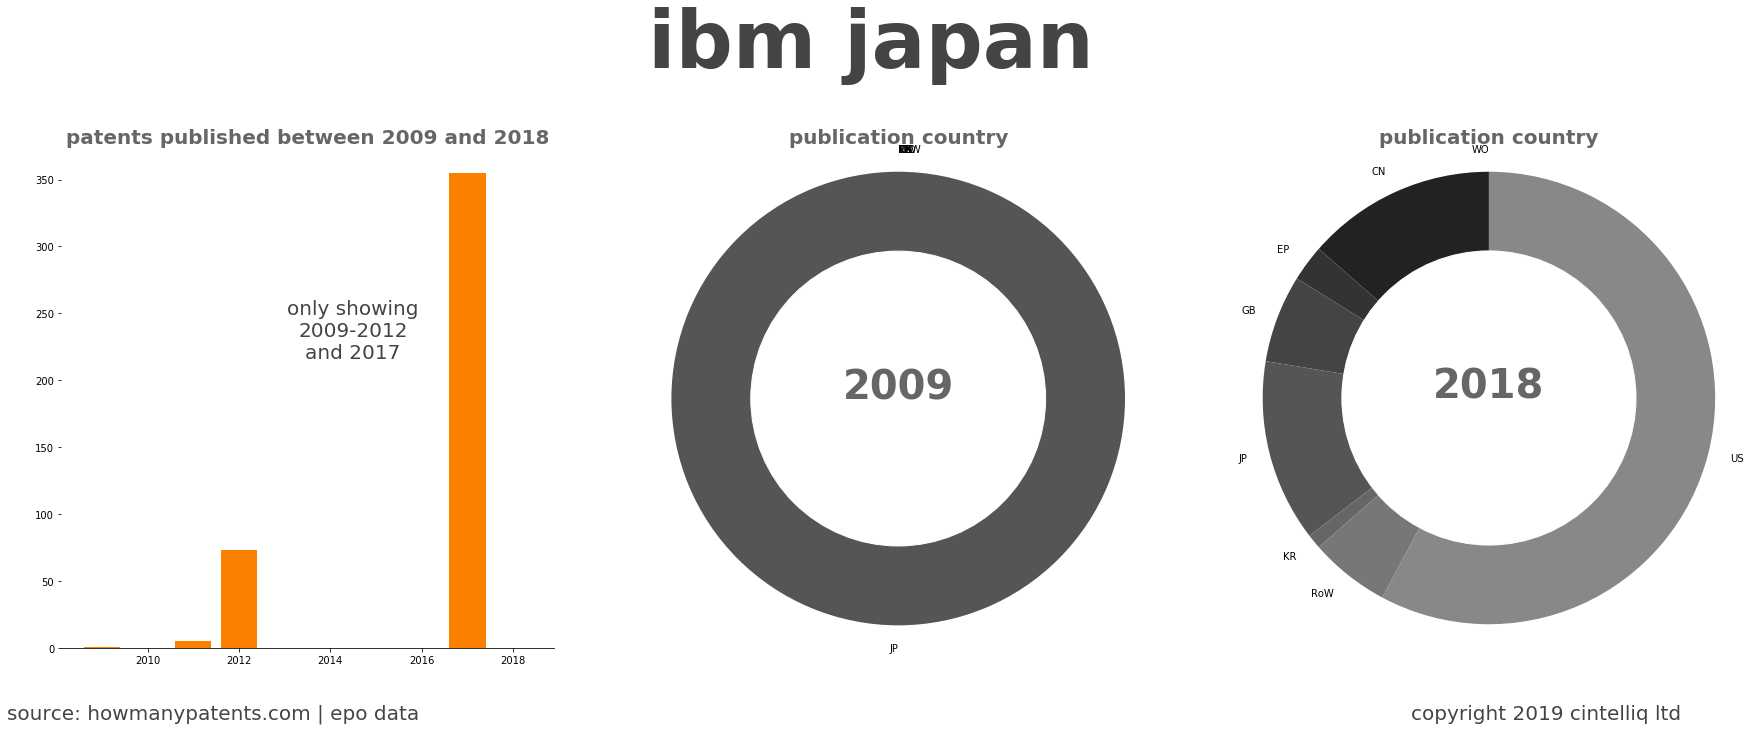 summary of patents for Ibm Japan